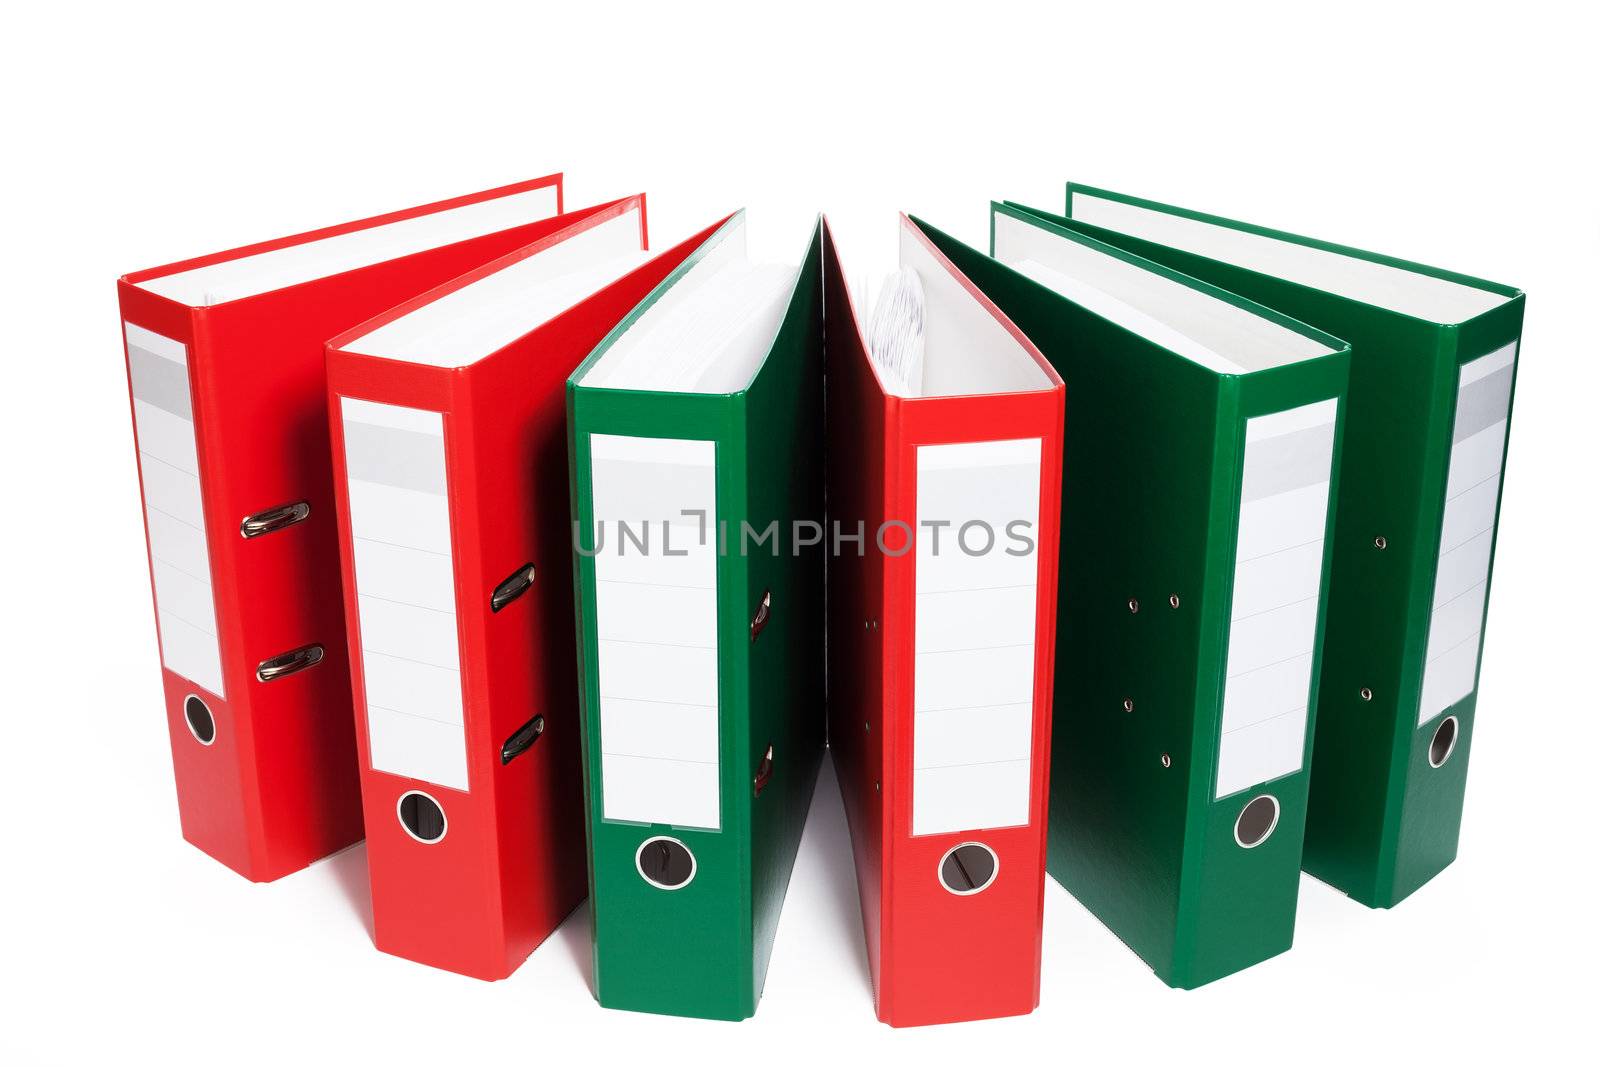 half circle of red and green ring binders on white background